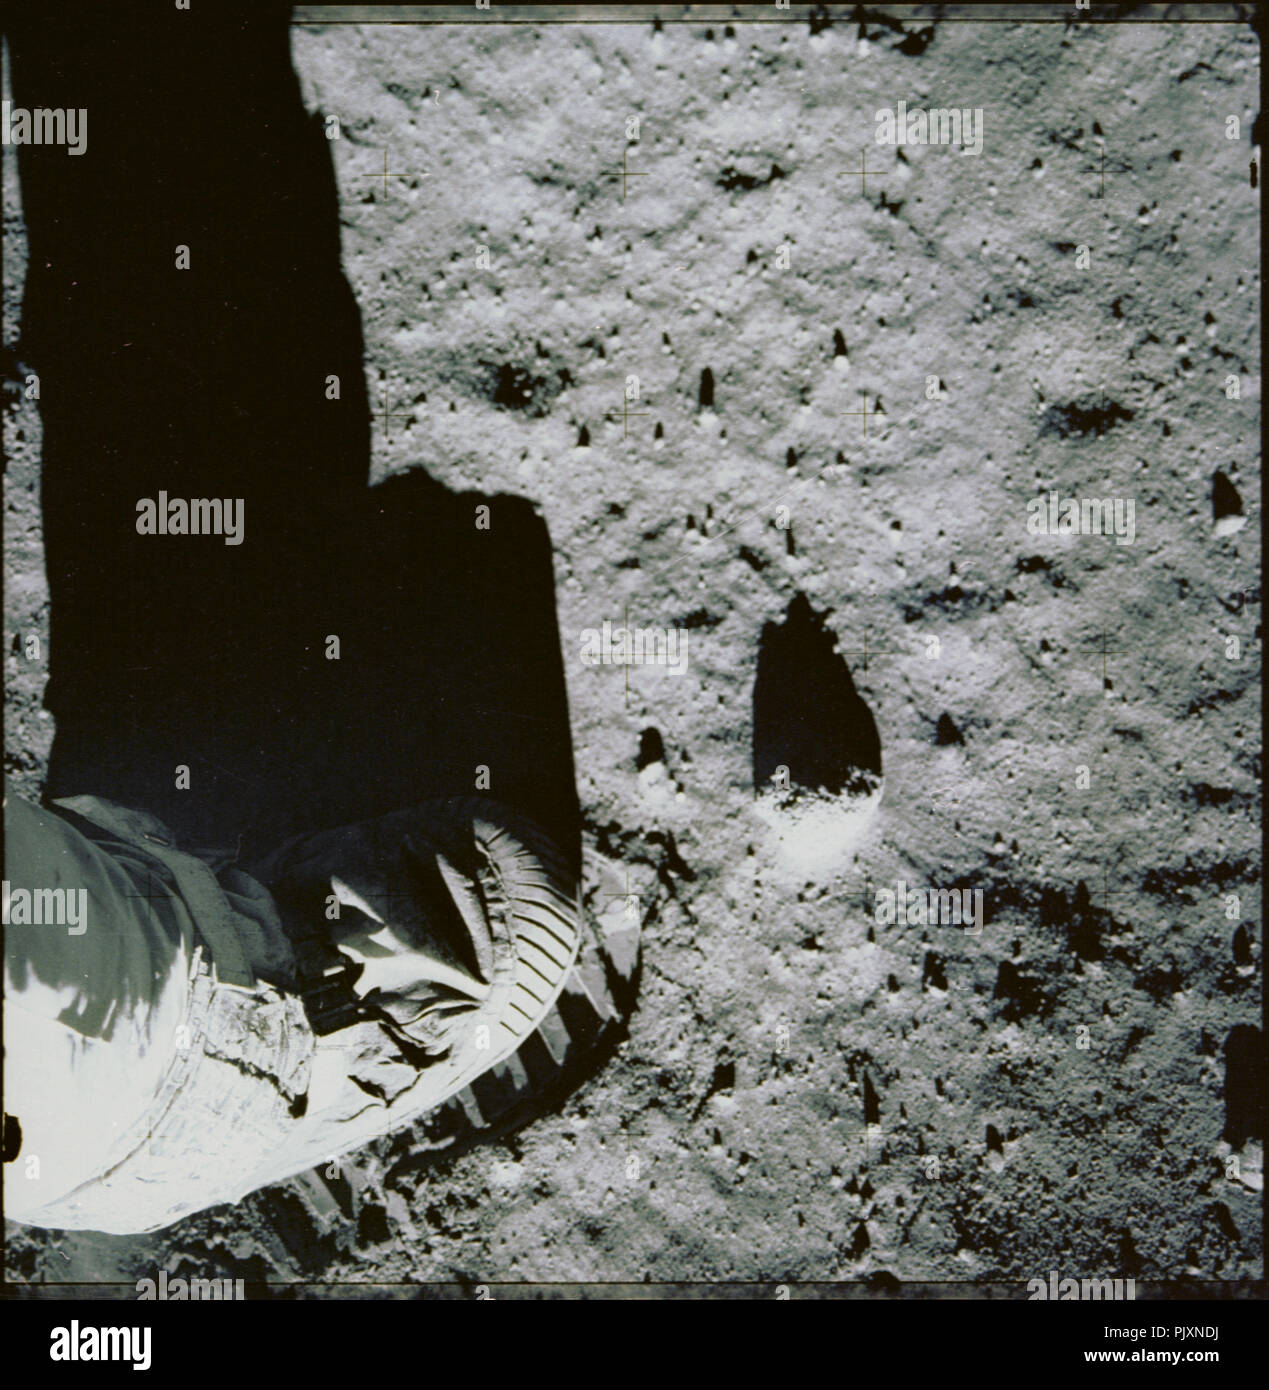 The Moon - (FILE) -- Apollo 11 astronaut Edwin Aldrin photographed his foot leaving an impression on the lunar soil as part of an experiment to study the nature of lunar dust and the effects of pressure on the surface. The dust was found to compact easily under the weight of the astronauts leaving a shallow but clear impression of the boots, characteristic of a very fine, dry material. Credit: NASA via CNP /MediaPunch Stock Photo